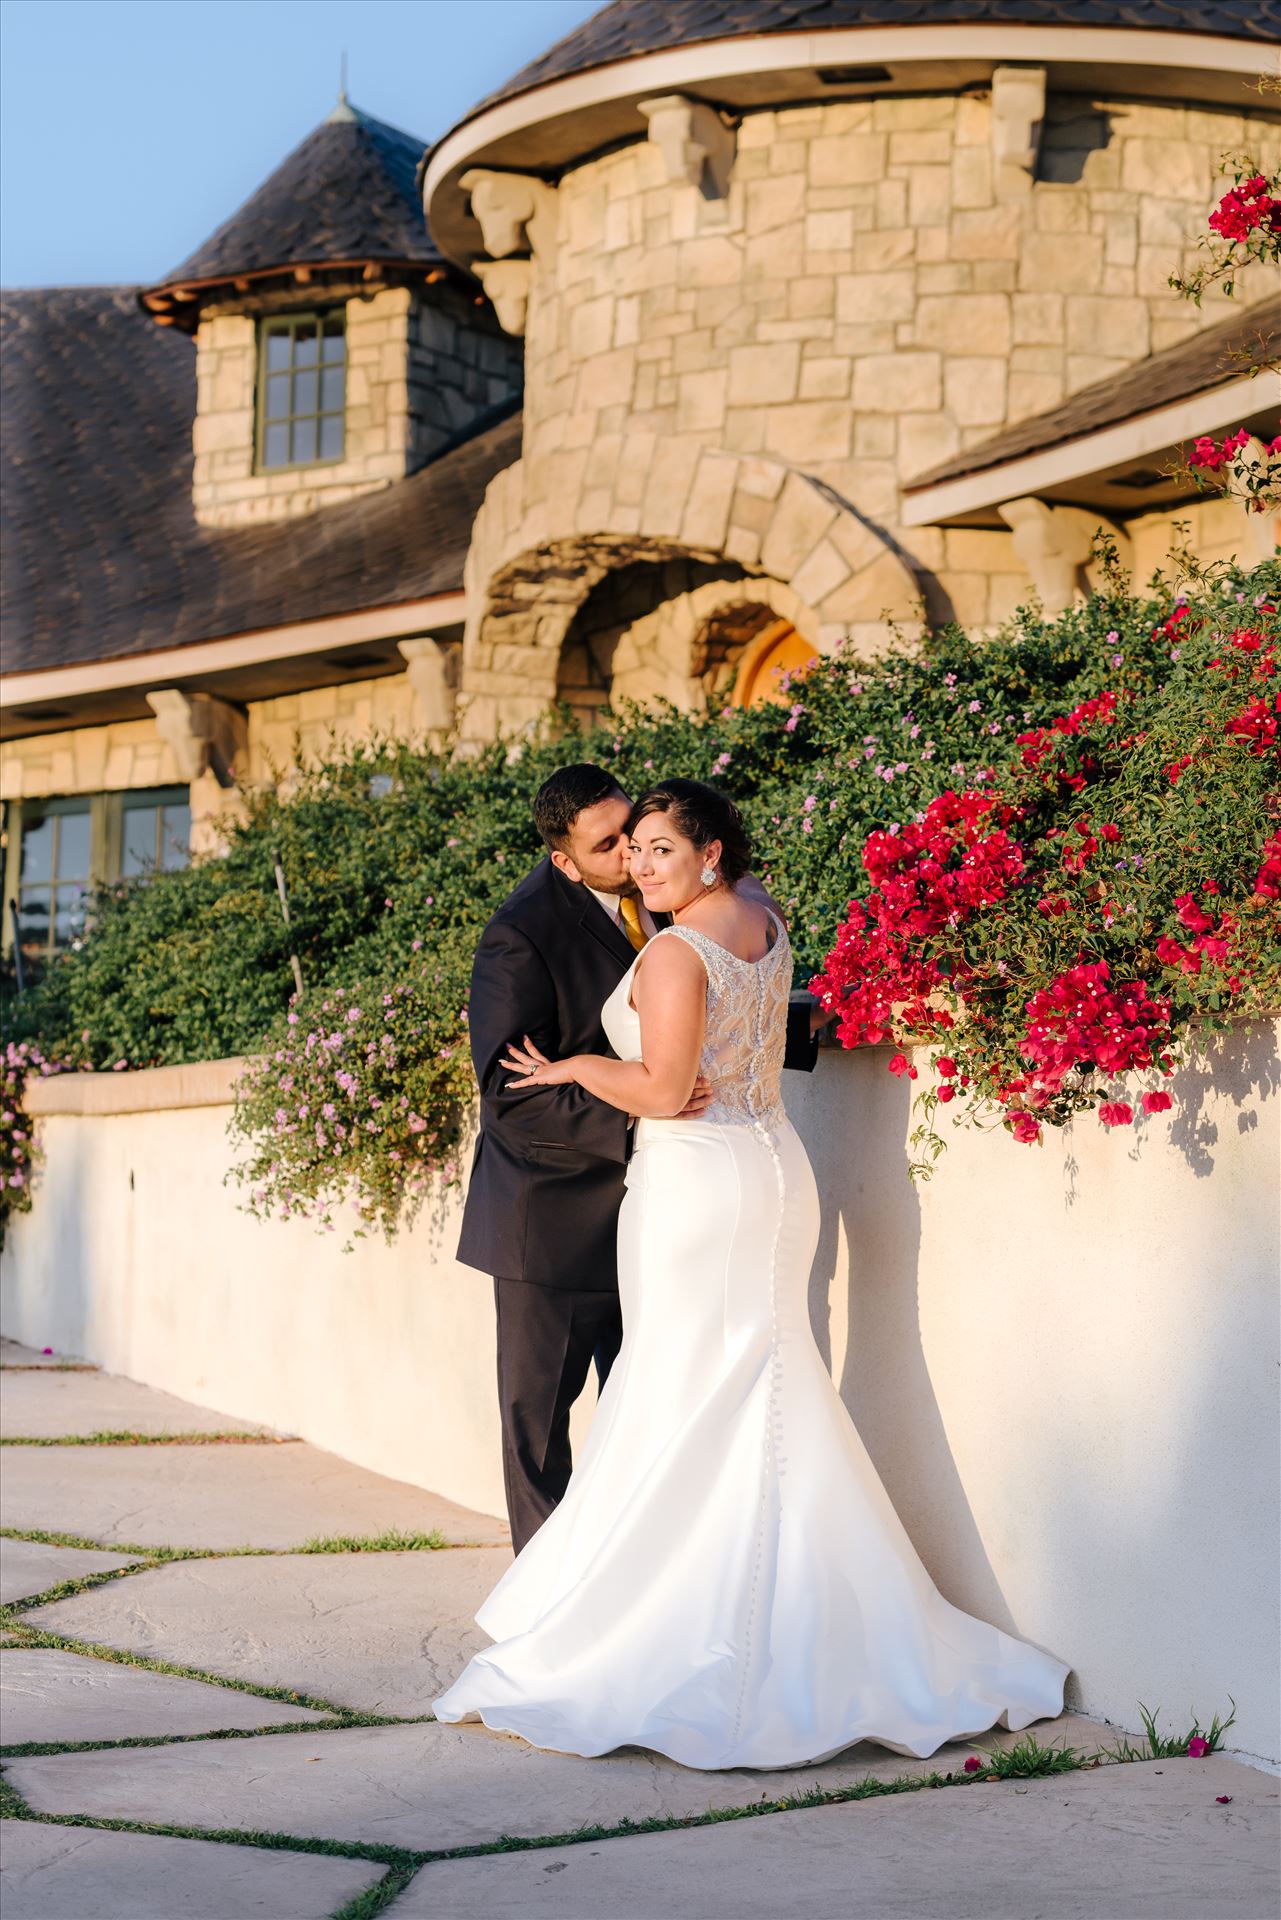 Victoria and Esteban 147 Sarah Williams of Mirror's Edge Photography captures the gorgeous fairy tale wedding day of Victoria and Esteban at the Castle Noland Wedding Venue in San Luis Obispo, California.  Bride and Groom at sunset in front of Castle Noland romatic by Sarah Williams